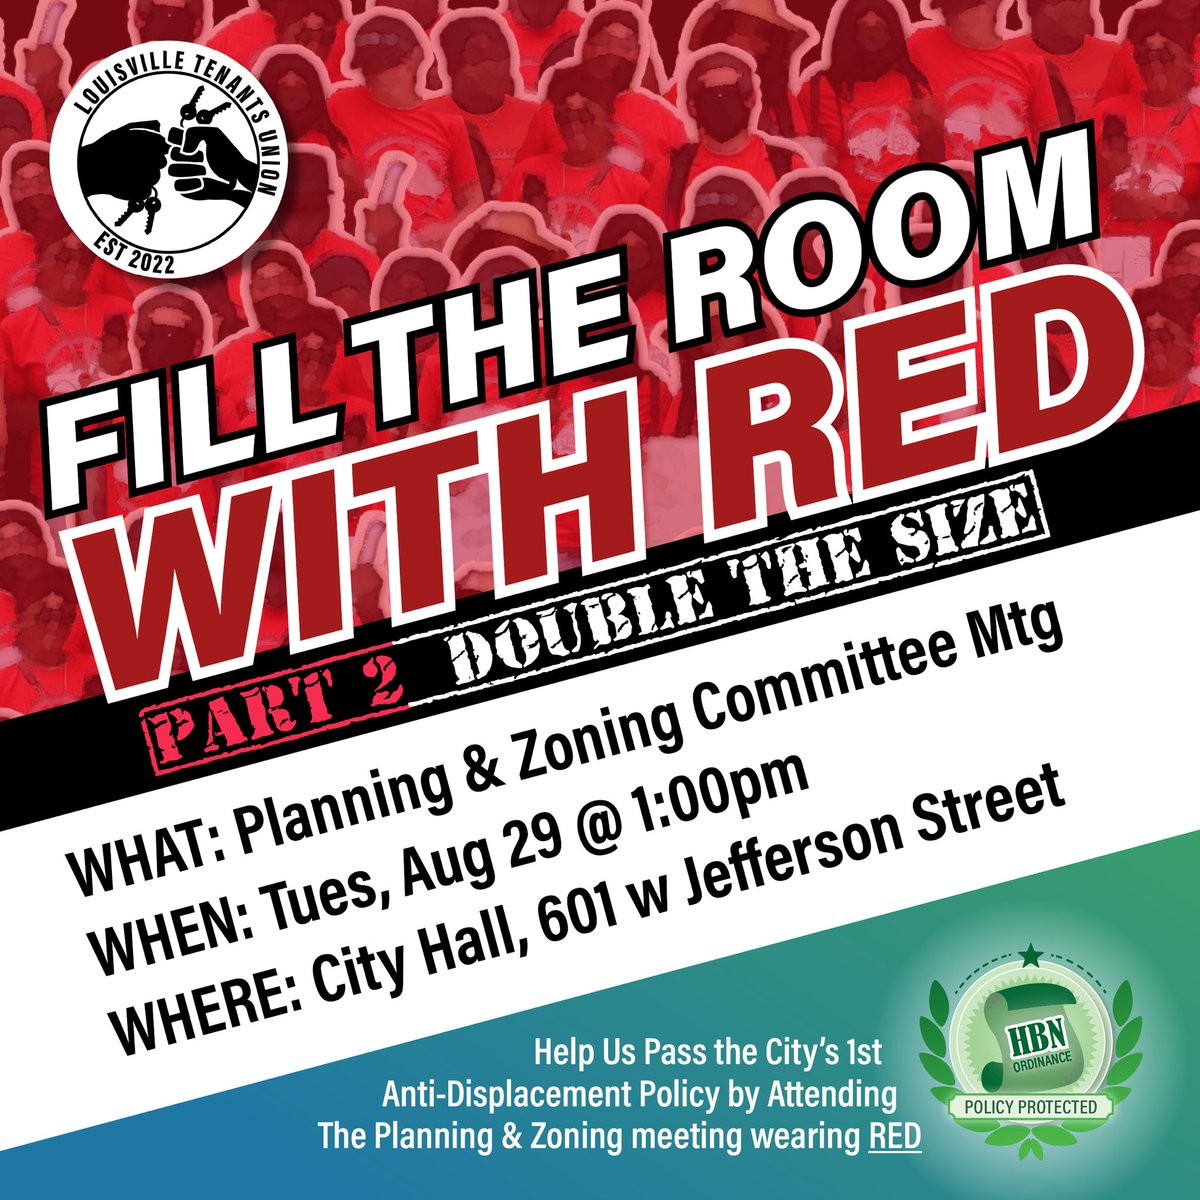 [Action Alert] The Rent's STILL Too Damn High! Help us pass #Louisville 's 1st Anti-Displacement #FairHousing ordinance by standing with residents on Aug 29th @ 1:00 pm at City Hall. Wear RED!  #HBNO #PolicyProtected  #EndCorporateWelfare  #STOPGentrification